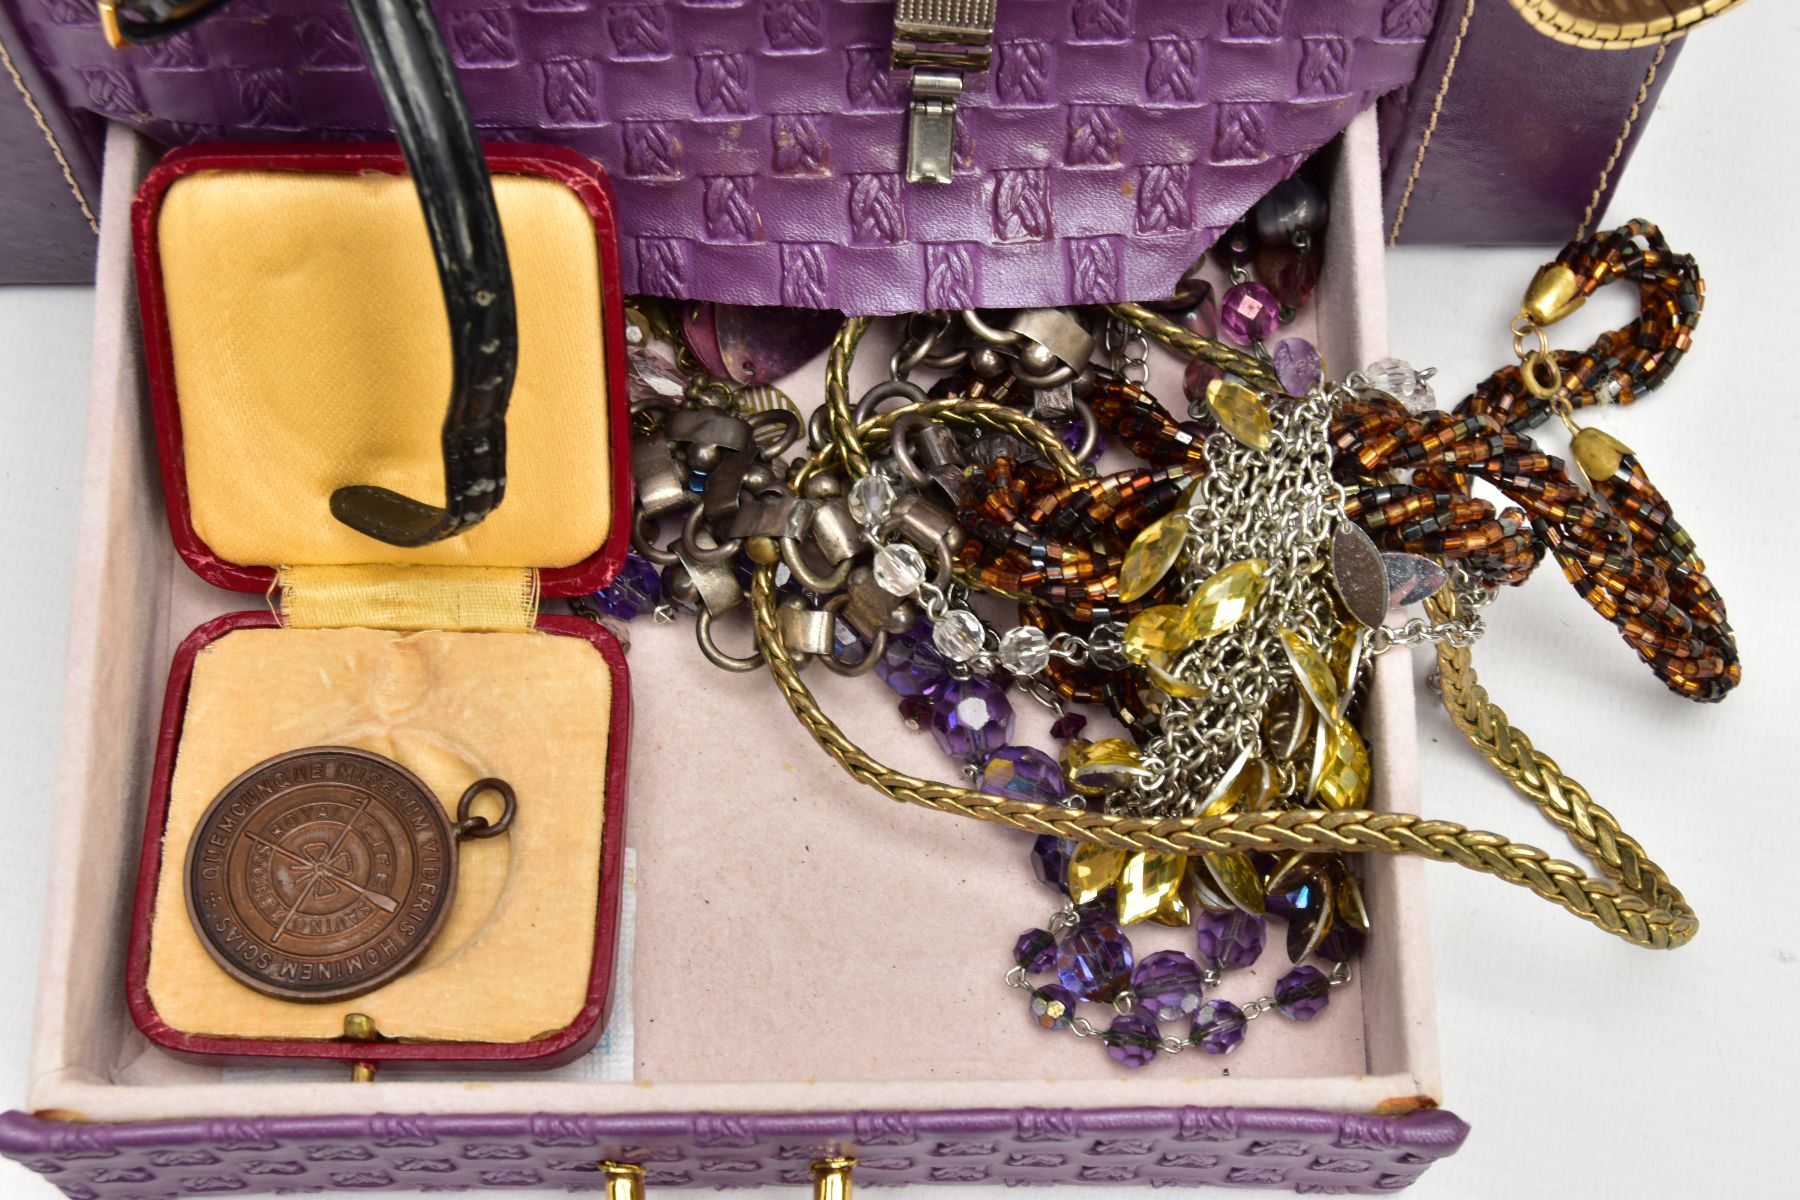 A JEWELLERY BOX AND ASSORTED COSTUME JEWELLERY ITEMS, a purple travel jewellery case together with a - Image 3 of 6